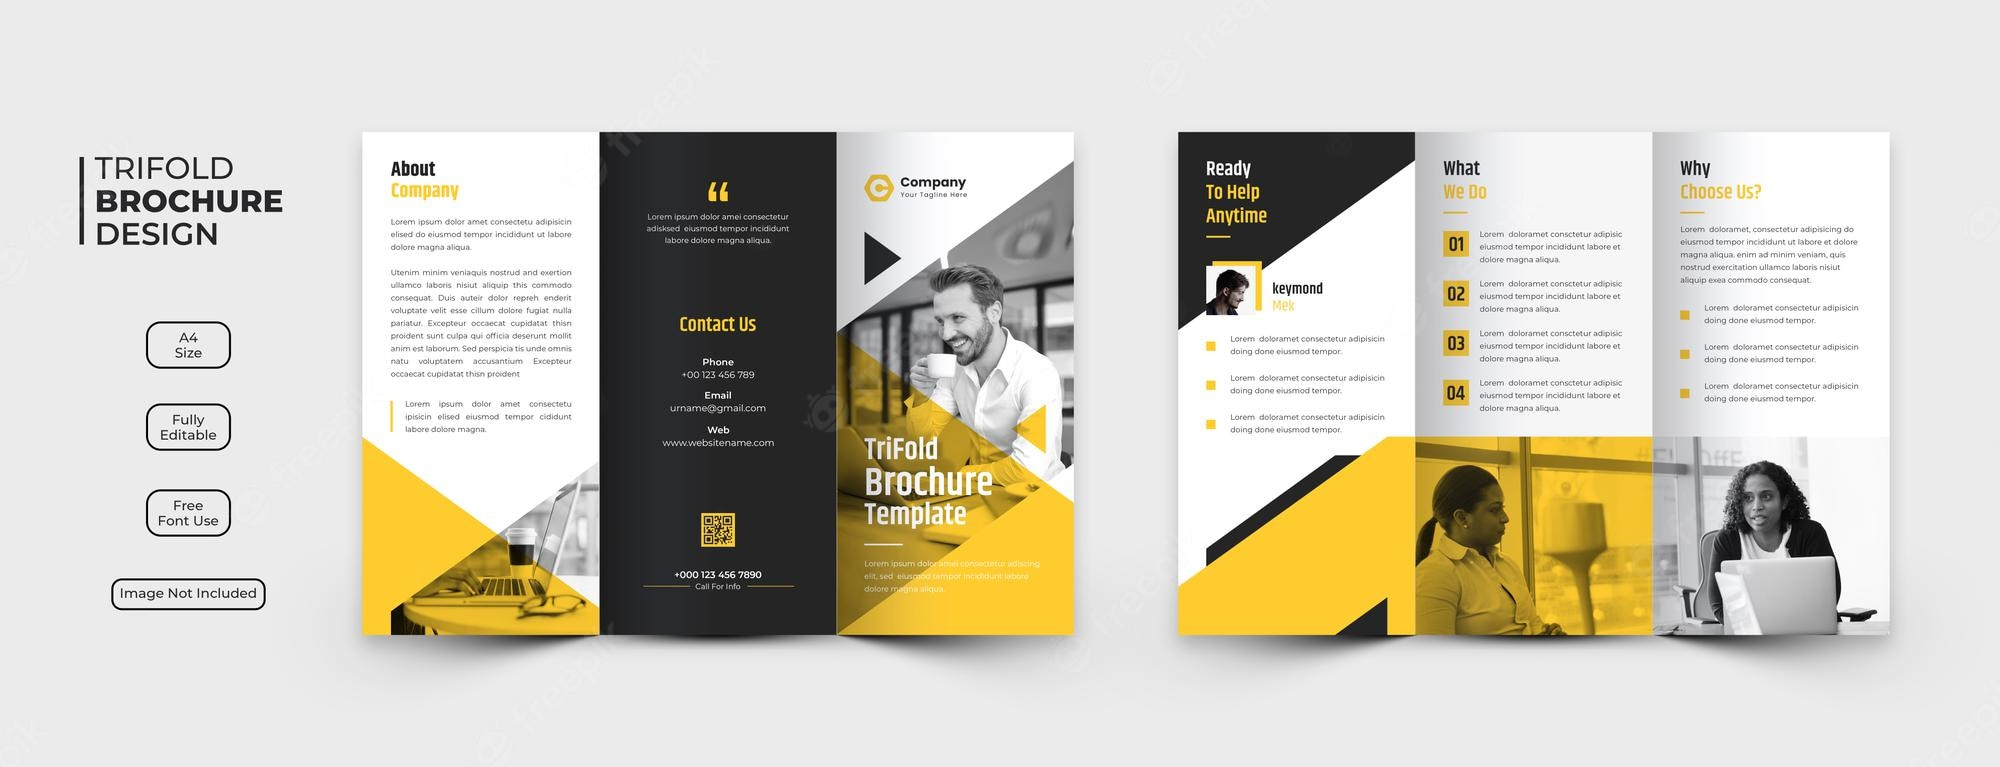 Trifold brochure template Images  Free Vectors, Stock Photos & PSD Throughout Free Online Tri Fold Brochure Template